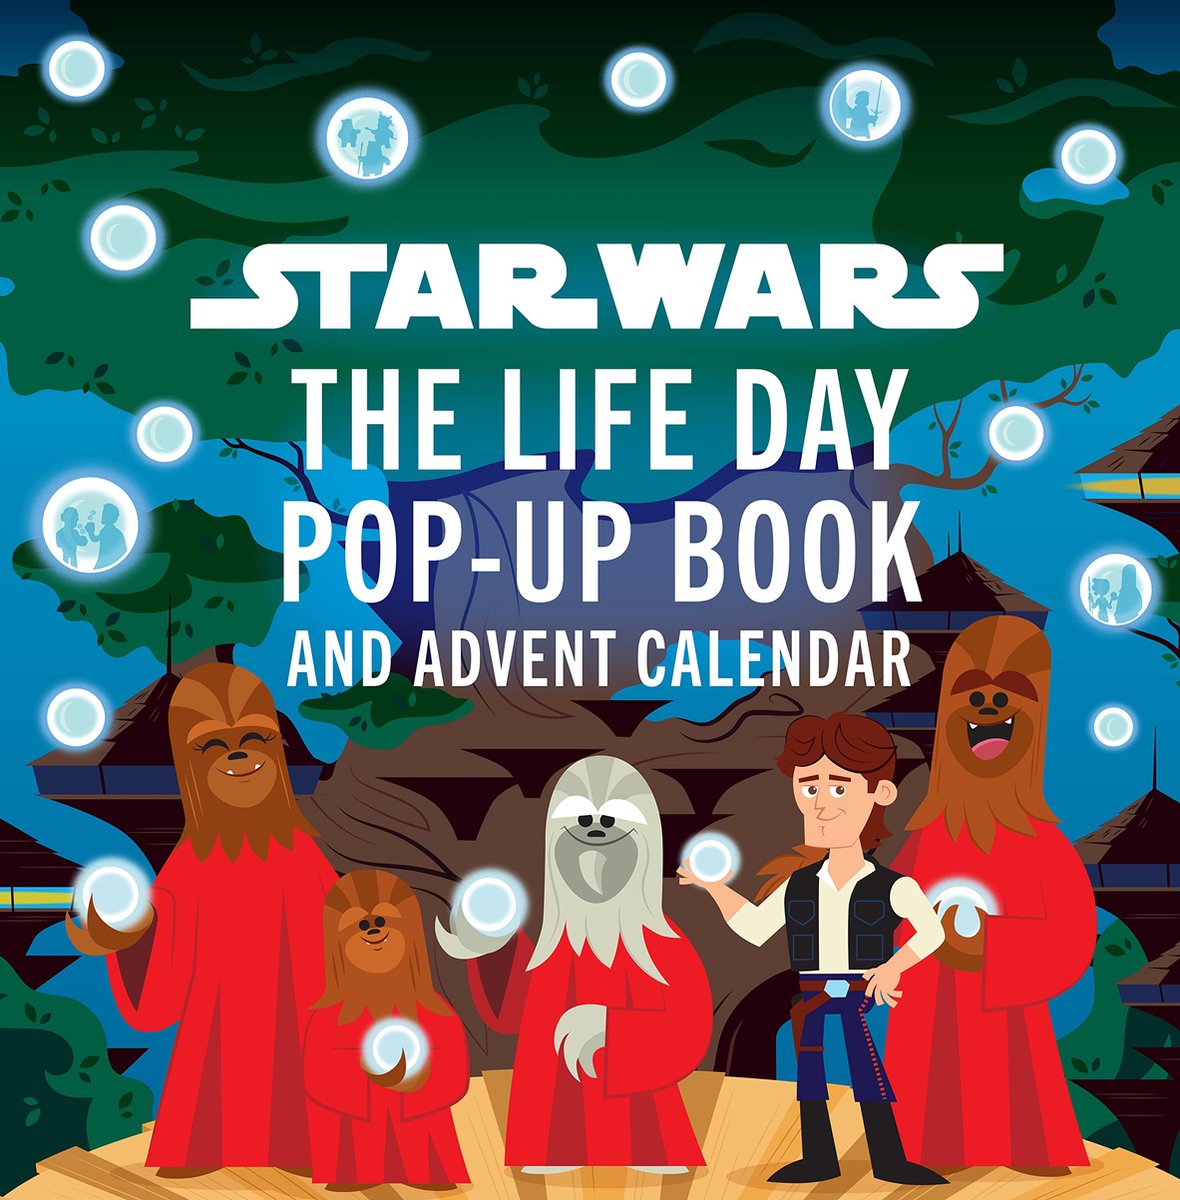 Star Wars the life day popup book advent calender